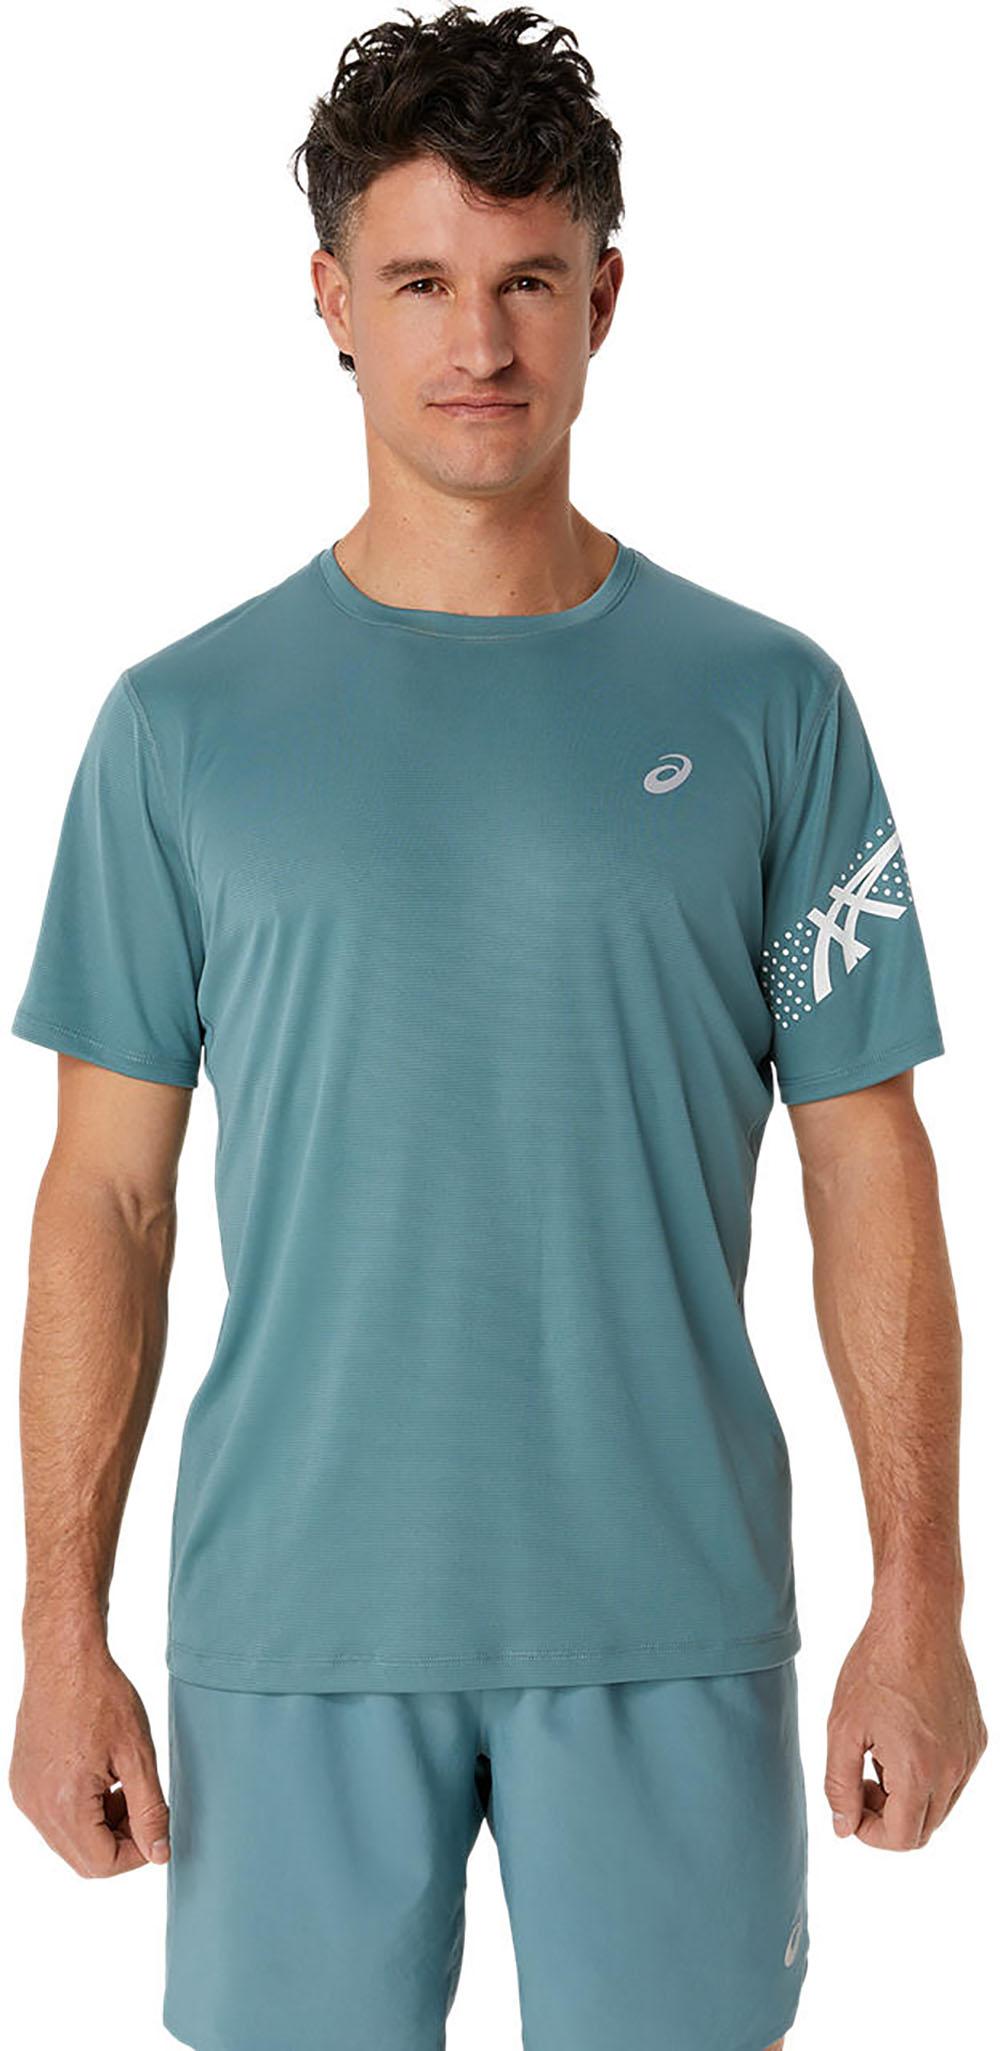 Icon Ss Top - Foggy Teal/brilliant White